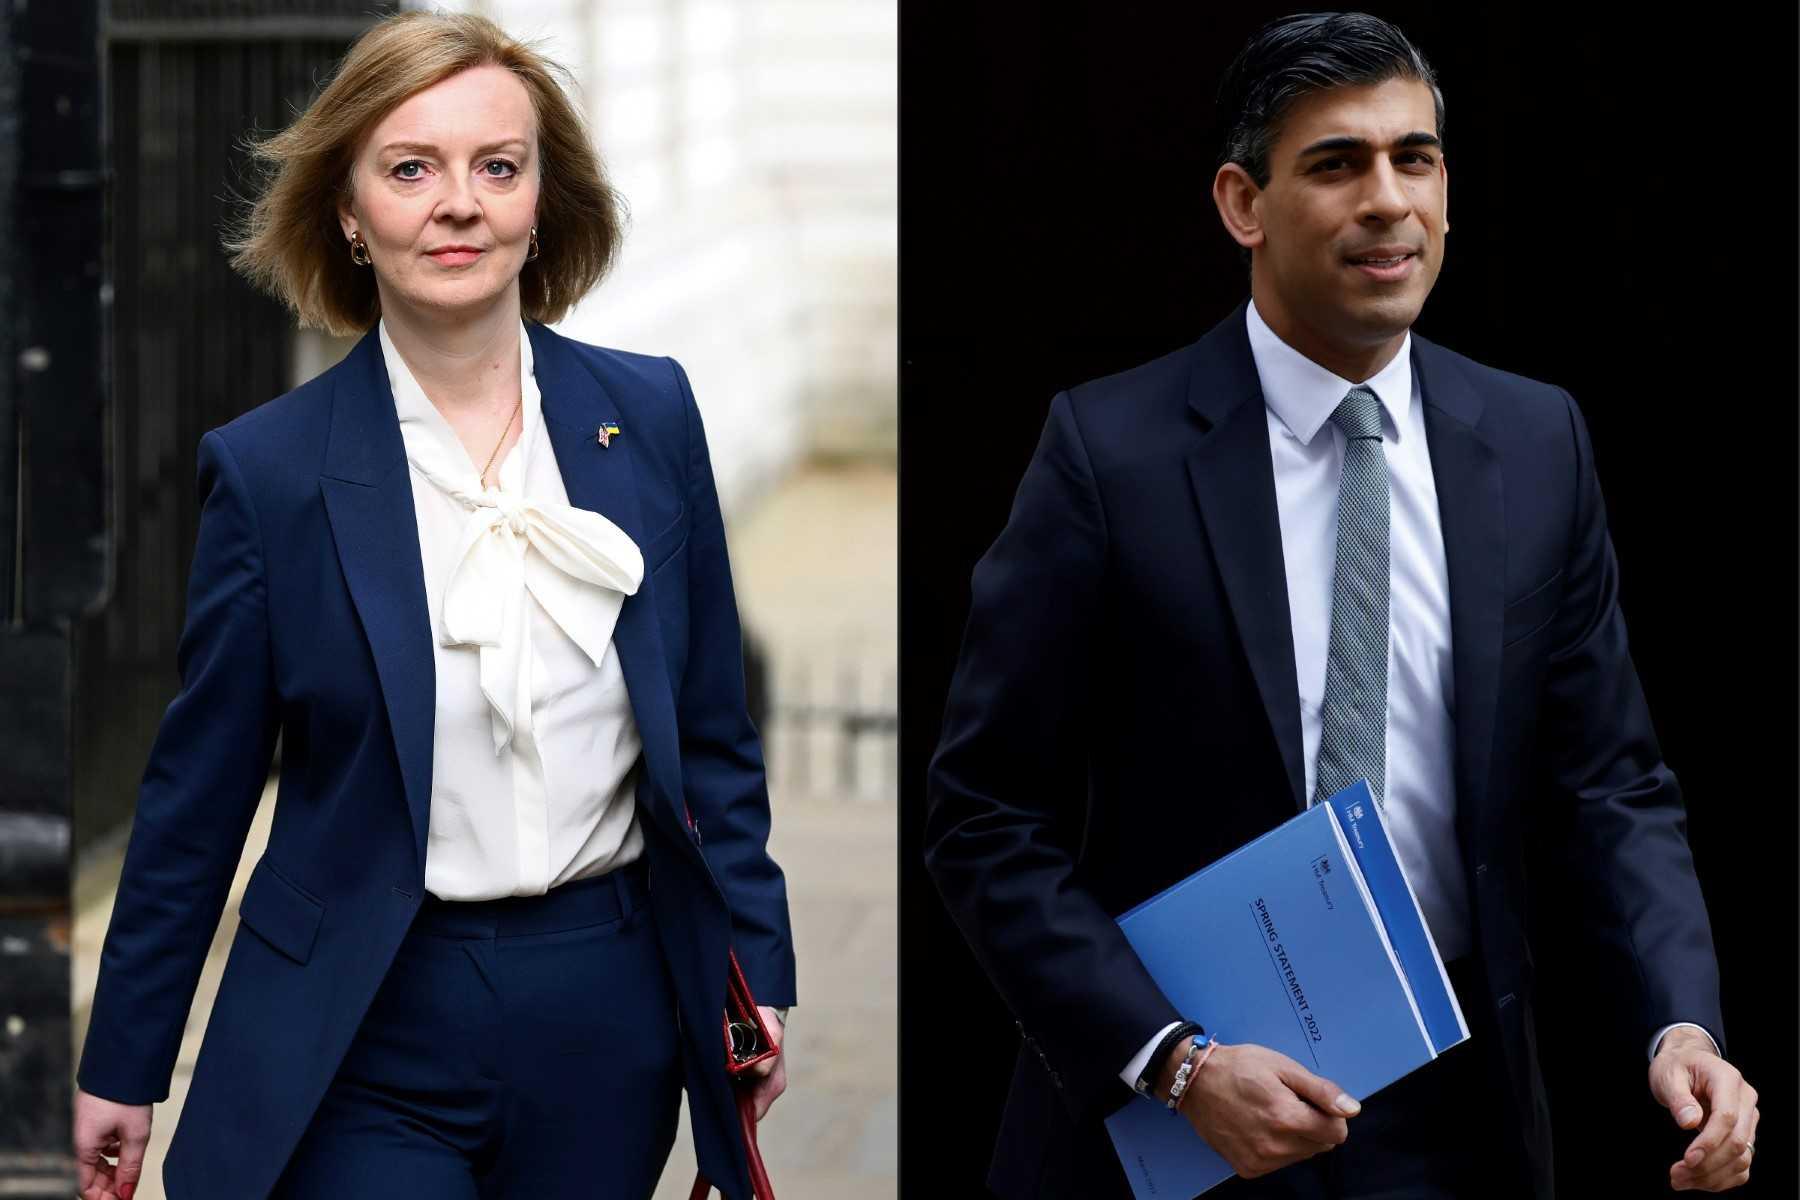 This combination of pictures created on July 12 shows Britain's Foreign Secretary Liz Truss (left) and Britain's Chancellor of the Exchequer Rishi Sunak. Photo: AFP